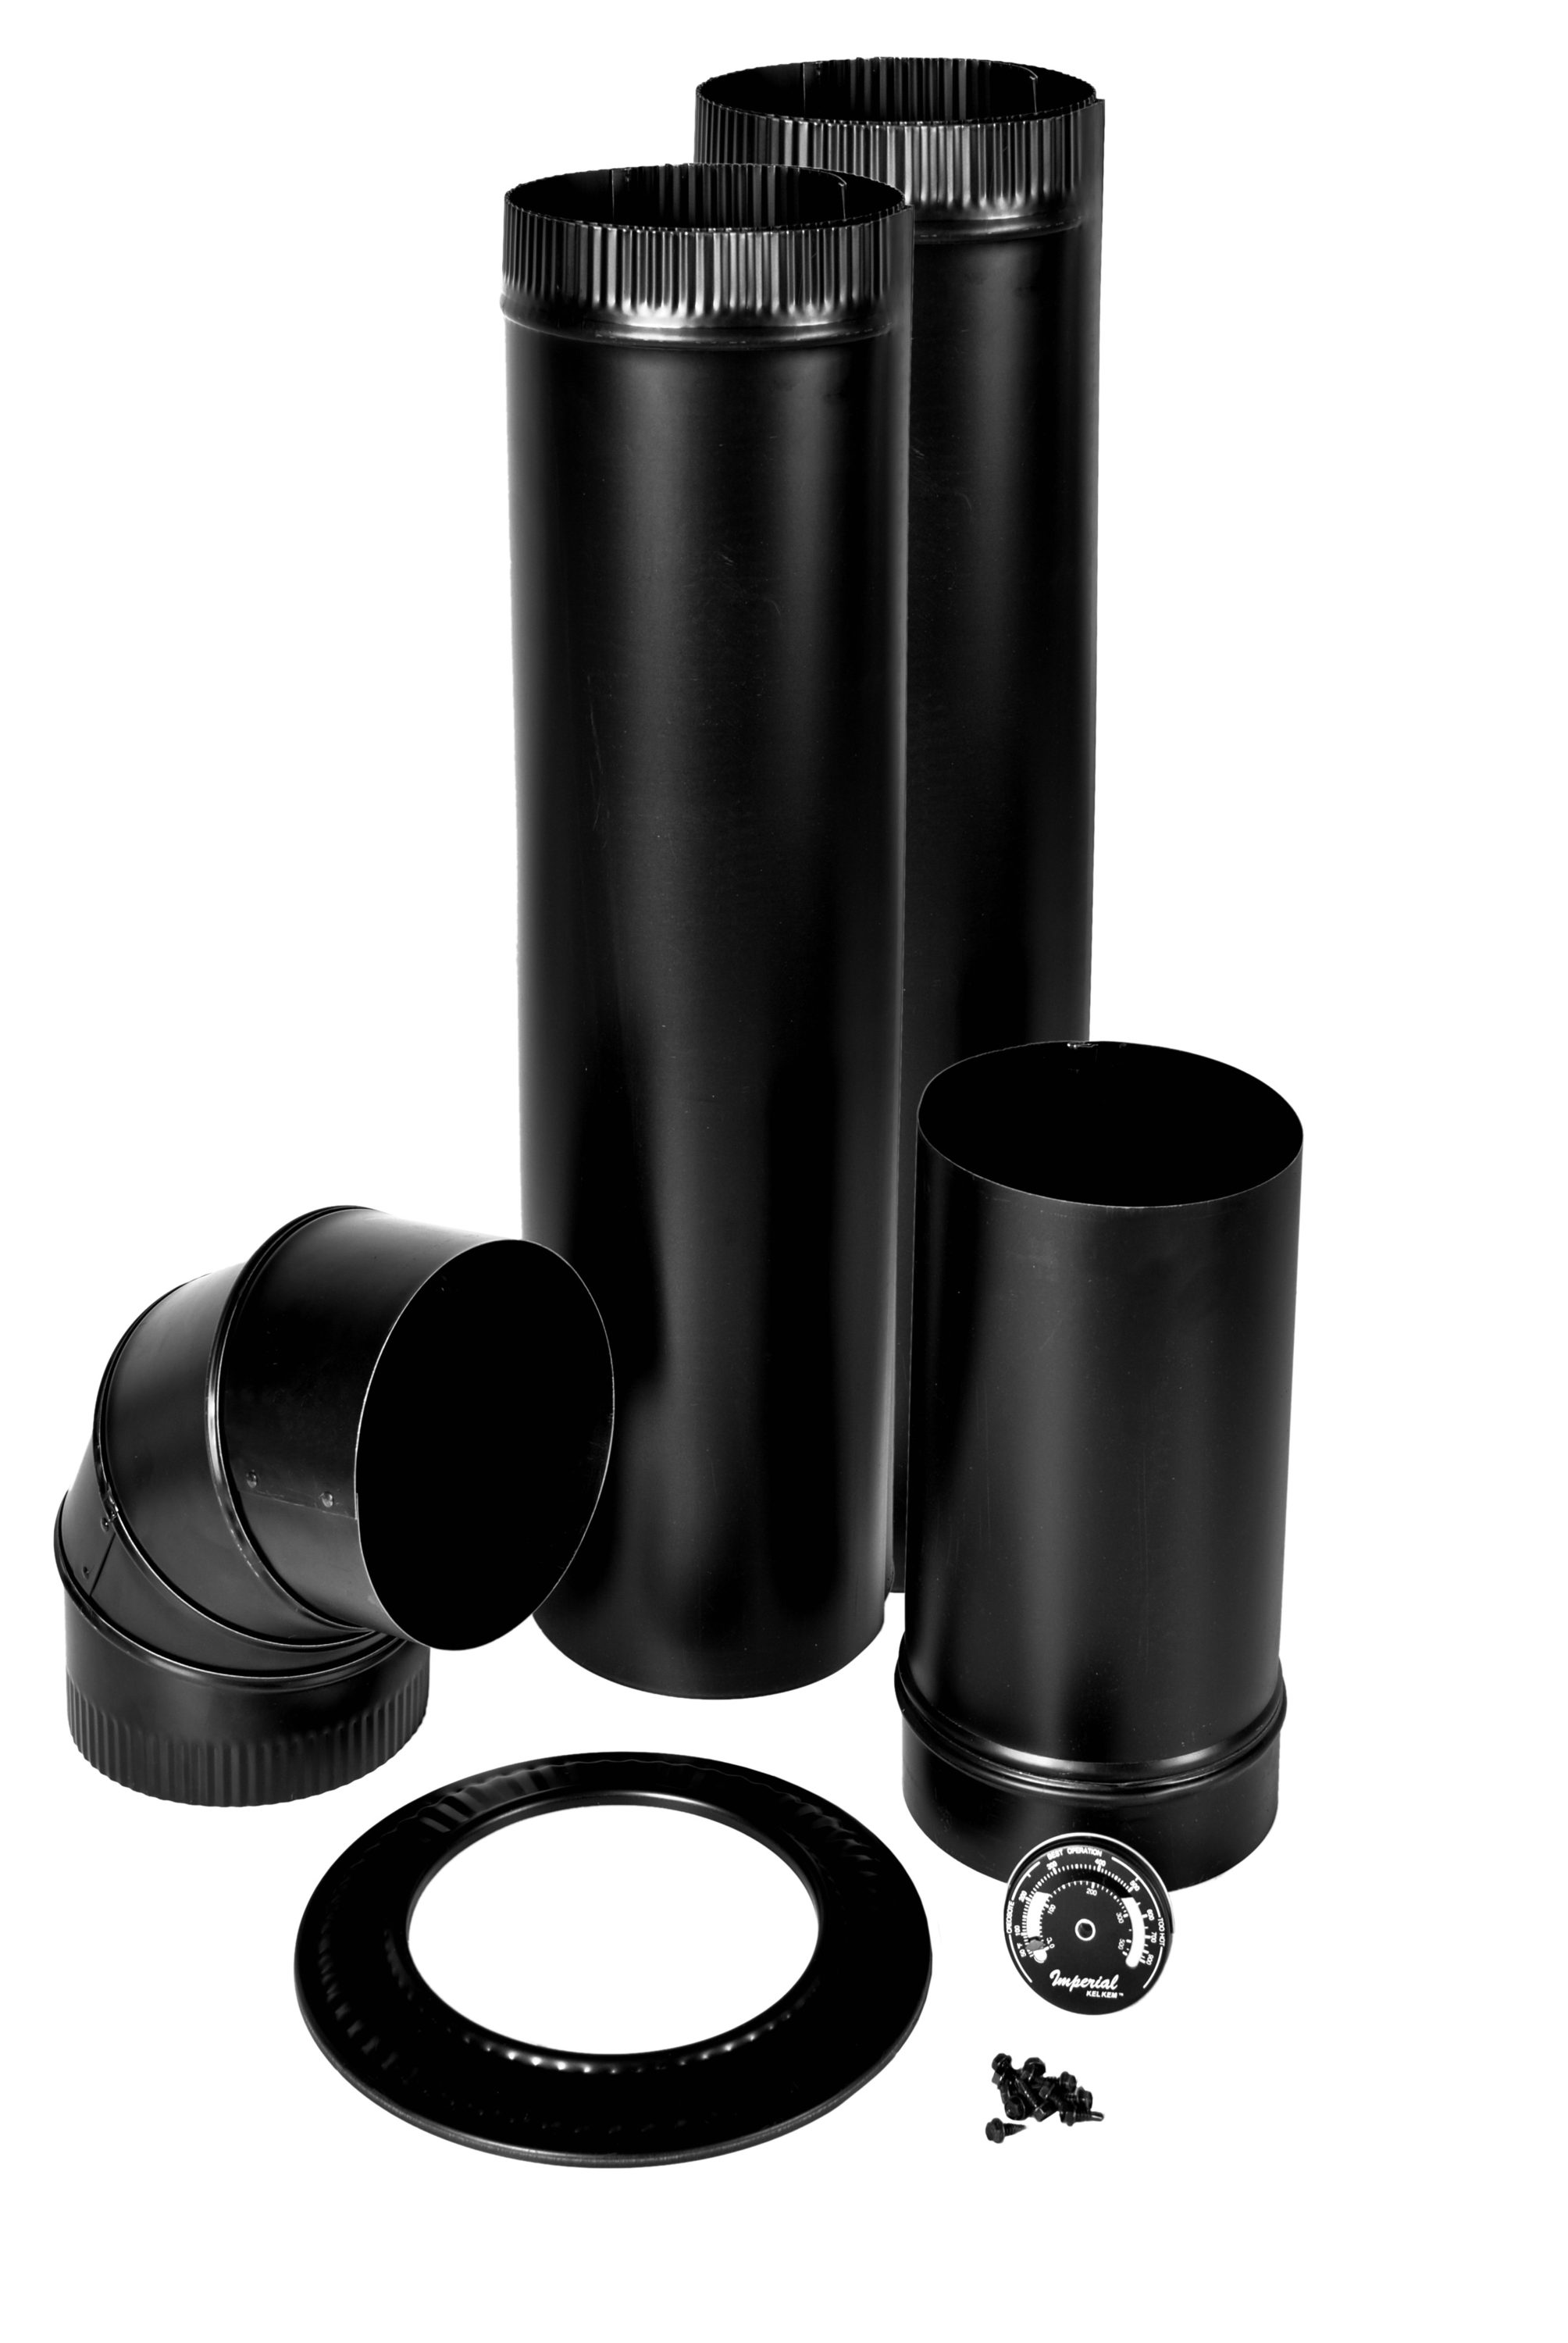 Osburn To-The-Wall Black Chimney Pipe Kit - 6